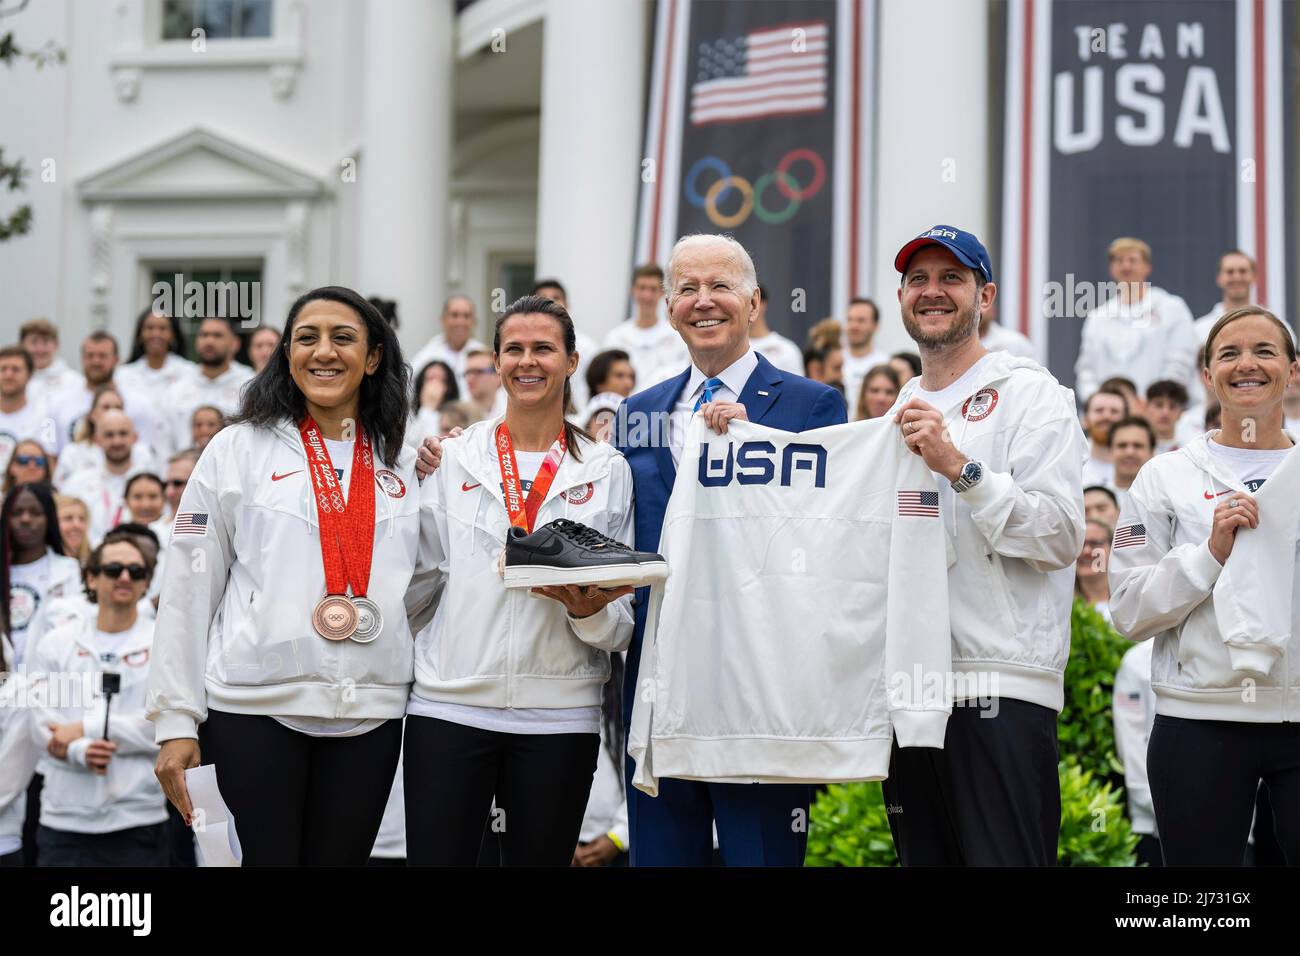 Washington, United States of America. 04 April, 2022. U.S President Joe Biden poses with members of the U.S. Olympic team during an event welcoming the athletes that participated in the Tokyo 2020 Summer Olympic and Paralympics, Beijing 2022 Winter Olympic and Paralympics, on the South Lawn of the White House, May 4, 2022 in Washington, D.C.  Credit: Adam Schultz/White House Photo/Alamy Live News Stock Photo